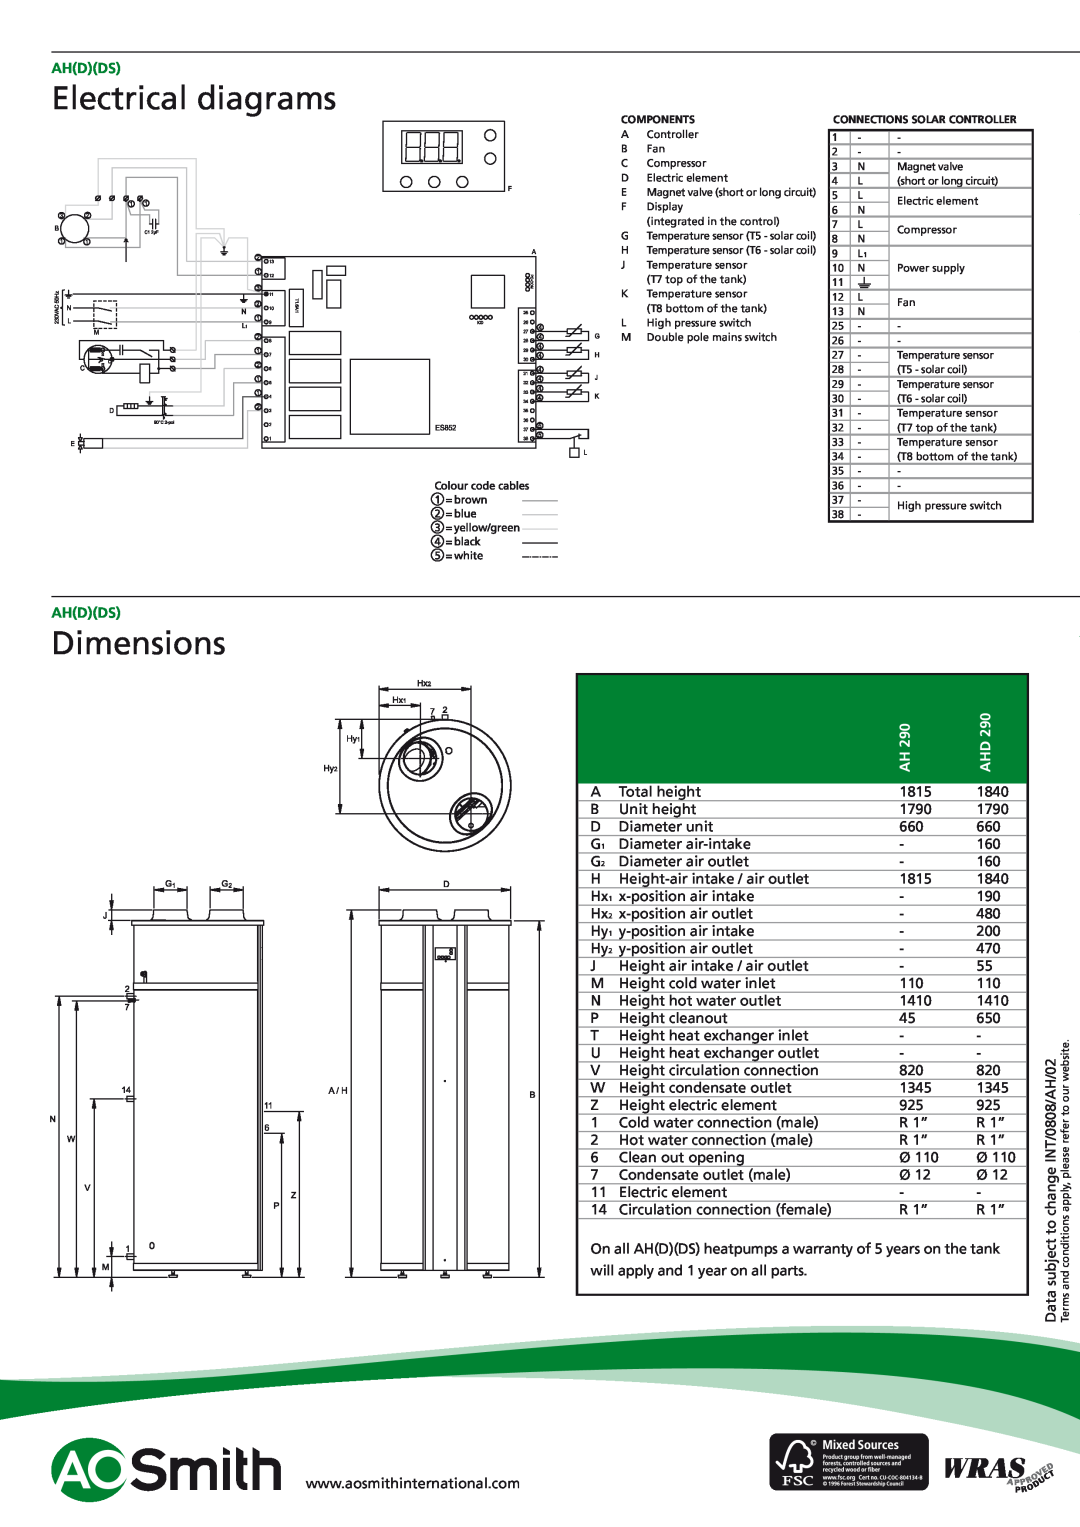 A.O. Smith AH - 290, AHD 290, AHDS 290 manual Electrical diagrams, Dimensions, Ahdds 